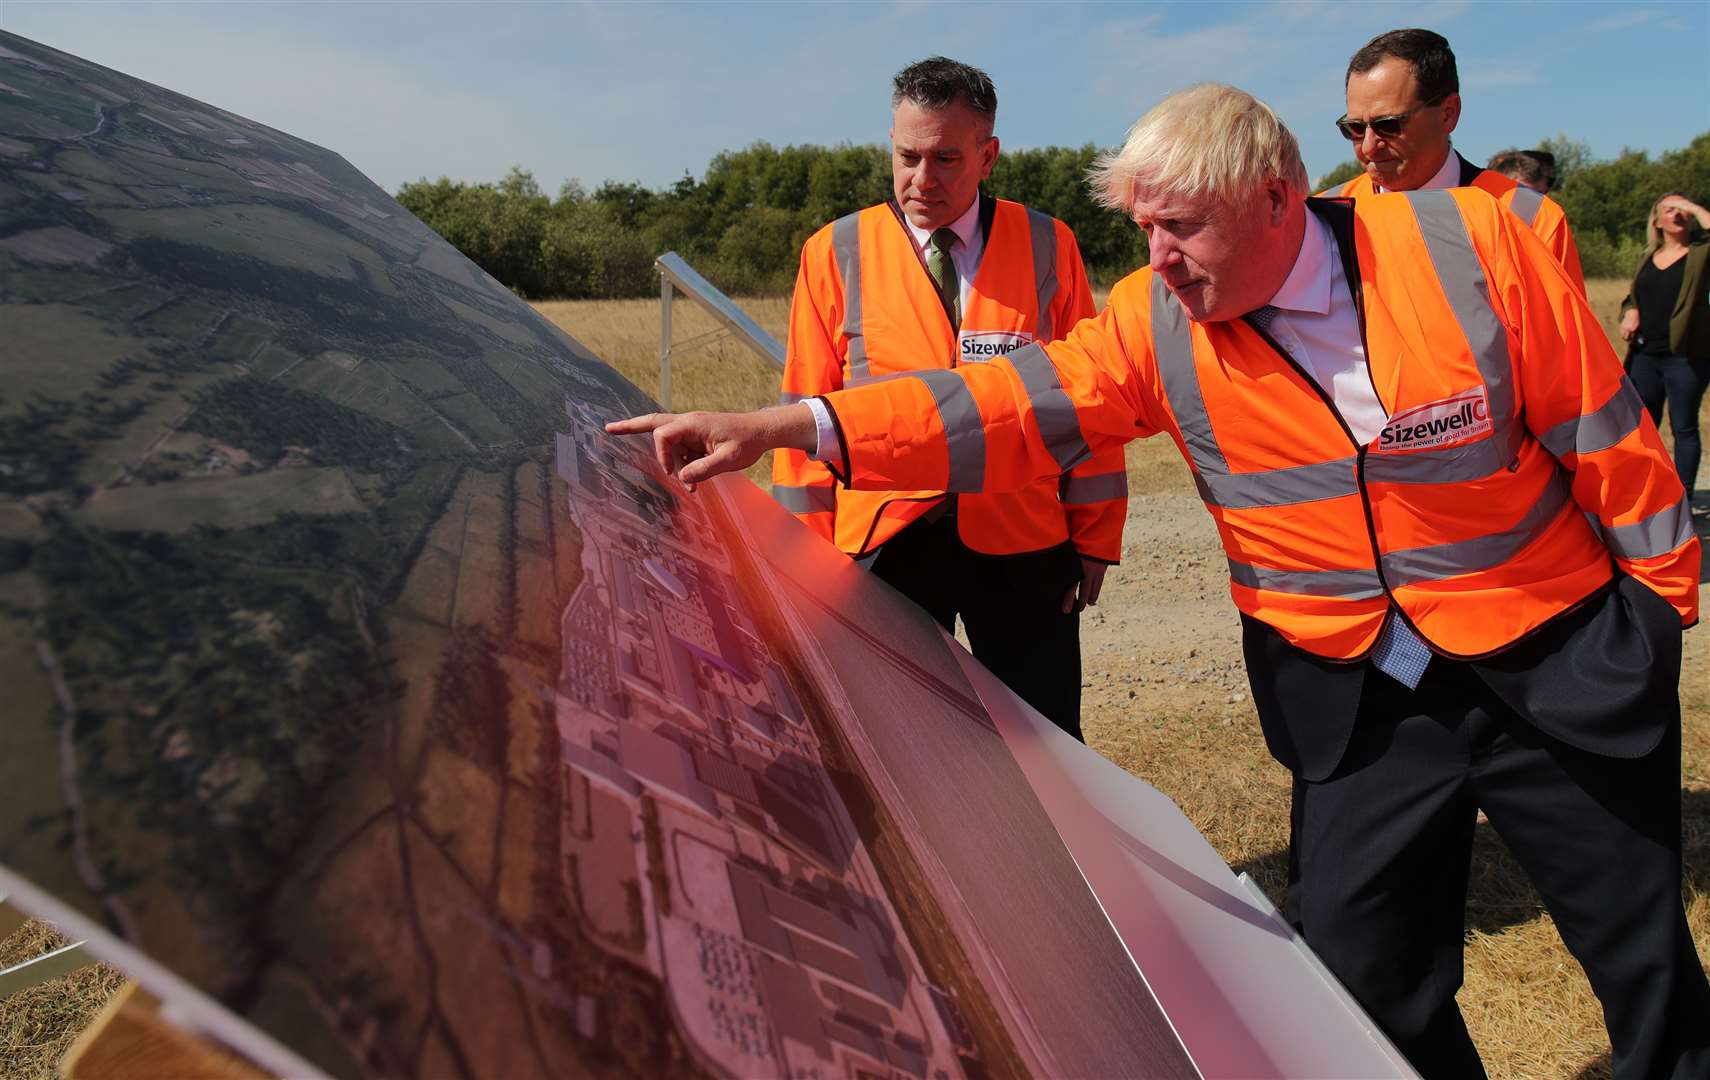 Boris Johnson looks at plans for the Sizewell C nuclear power station project (Chris Radburn/PA)